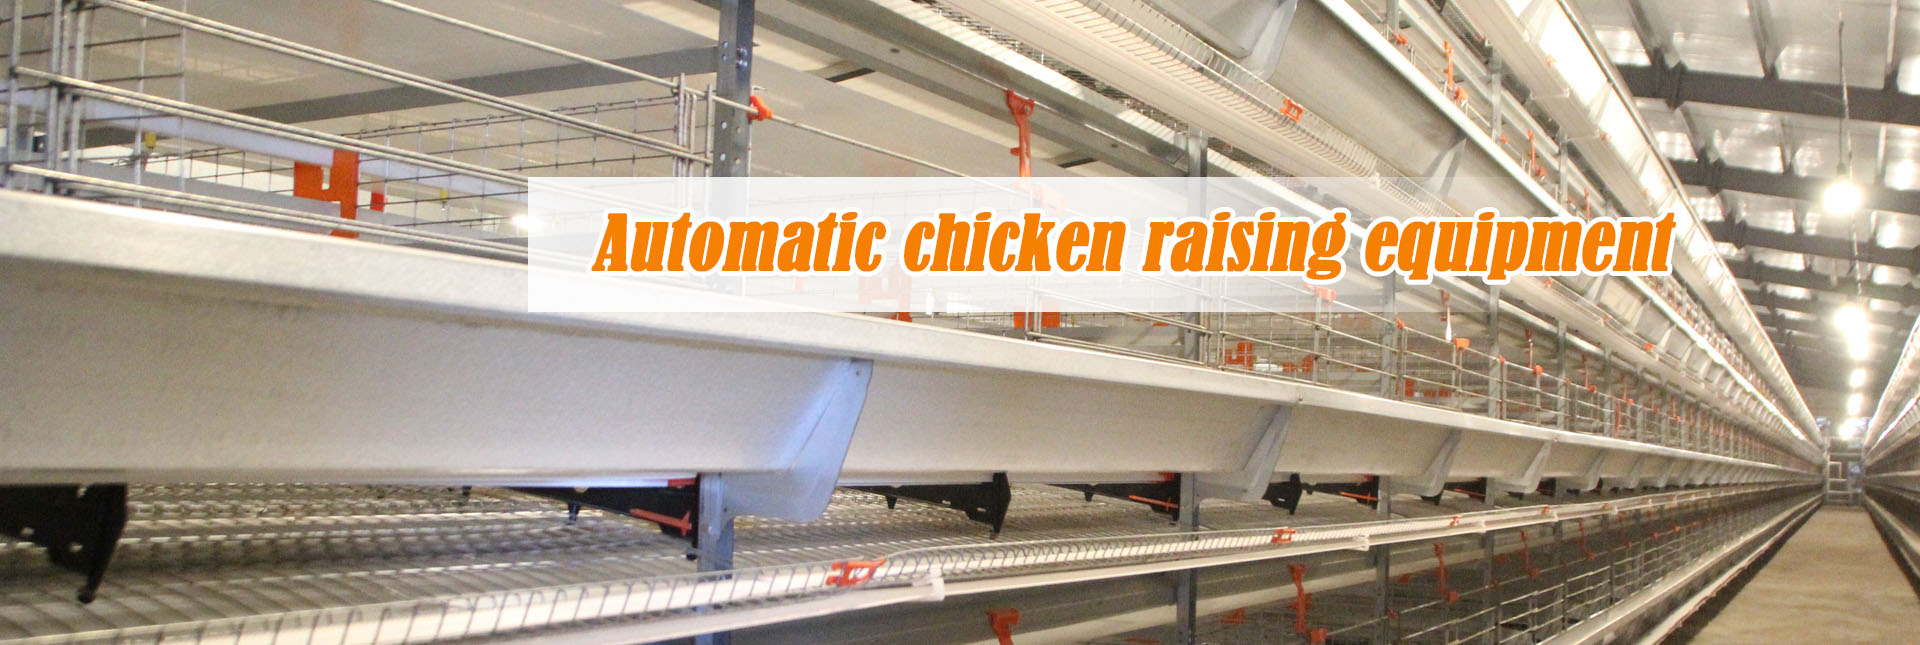 automatic chicken rsising equipment